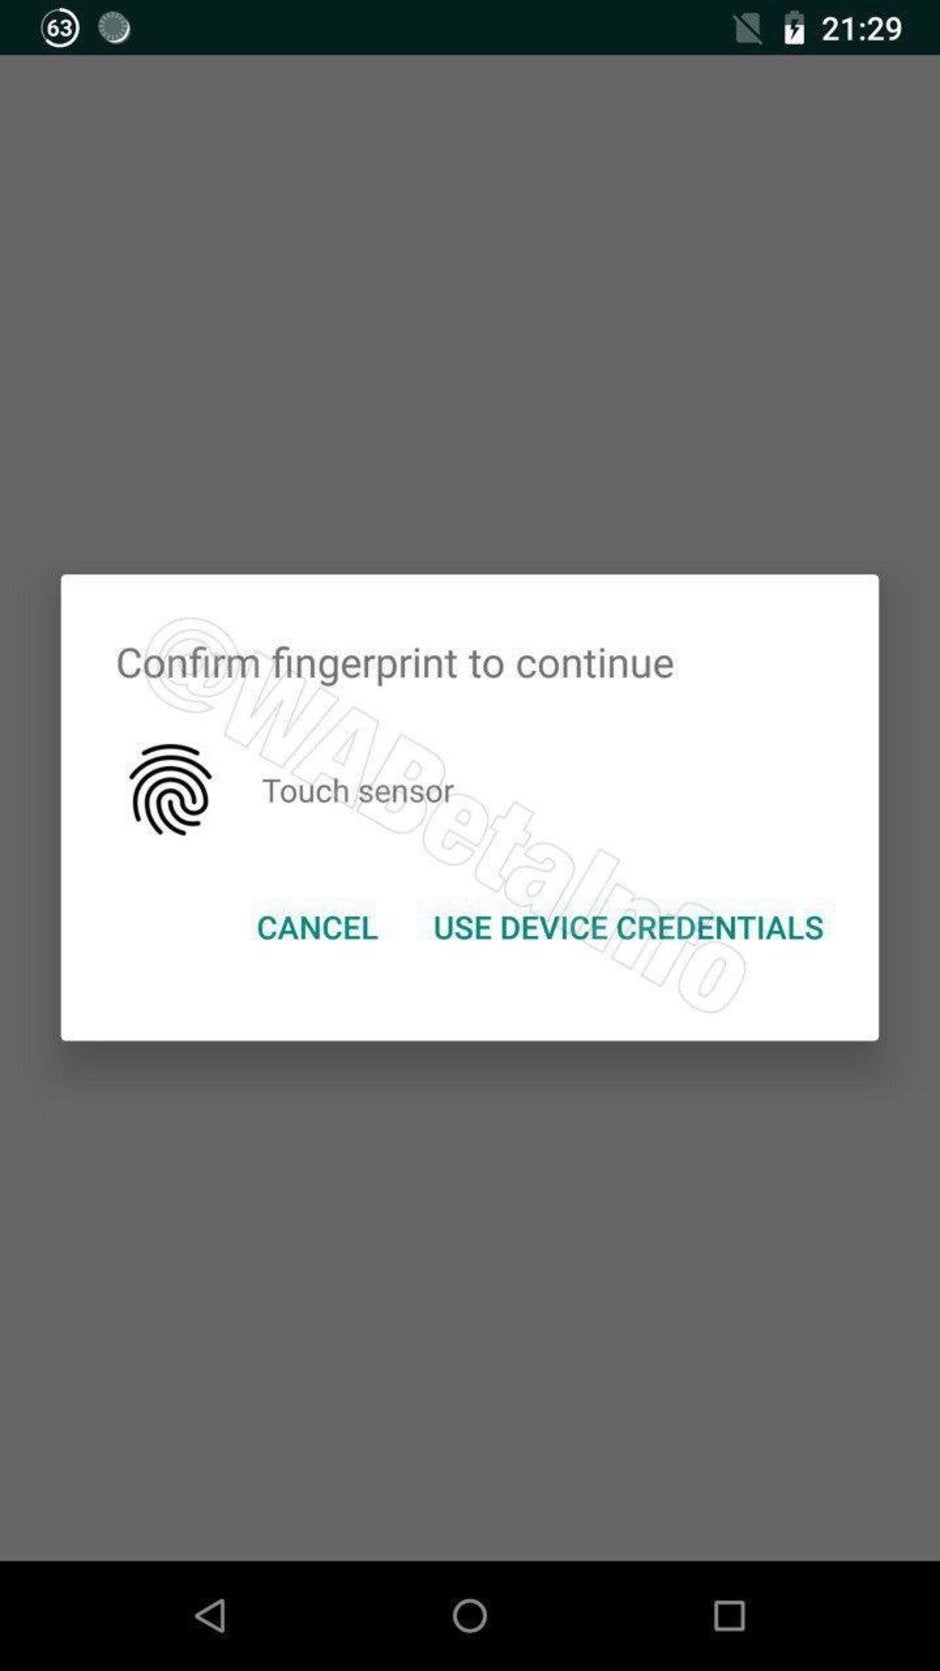 WhatsApp starts working on Touch ID security feature for Android users